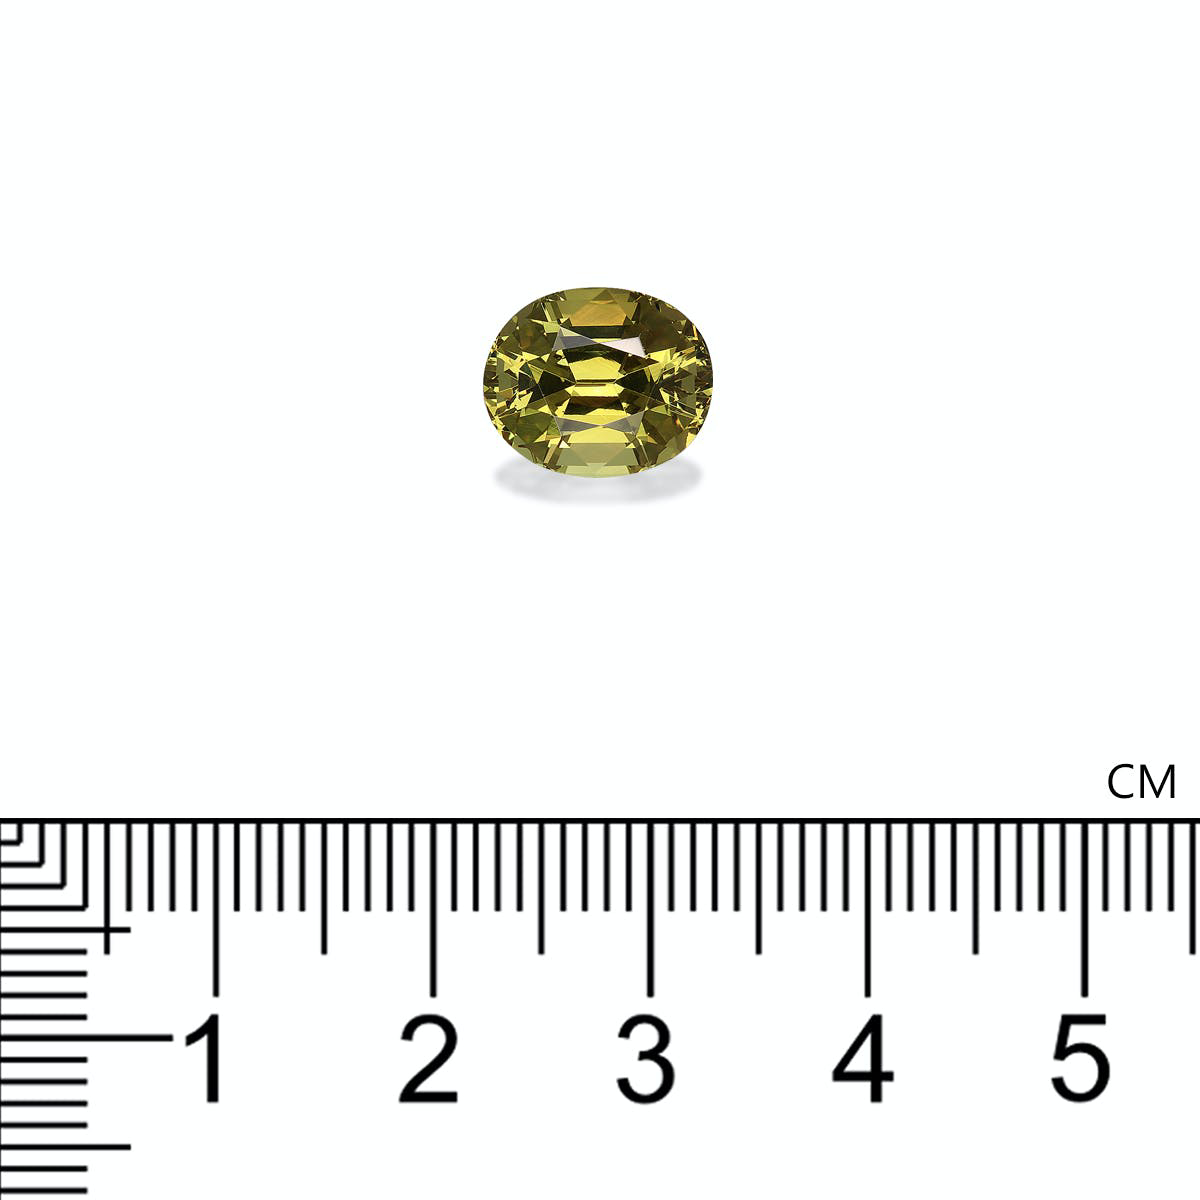 Picture of Lime Green Grossular Garnet 4.75ct - 10x8mm (GG0050)